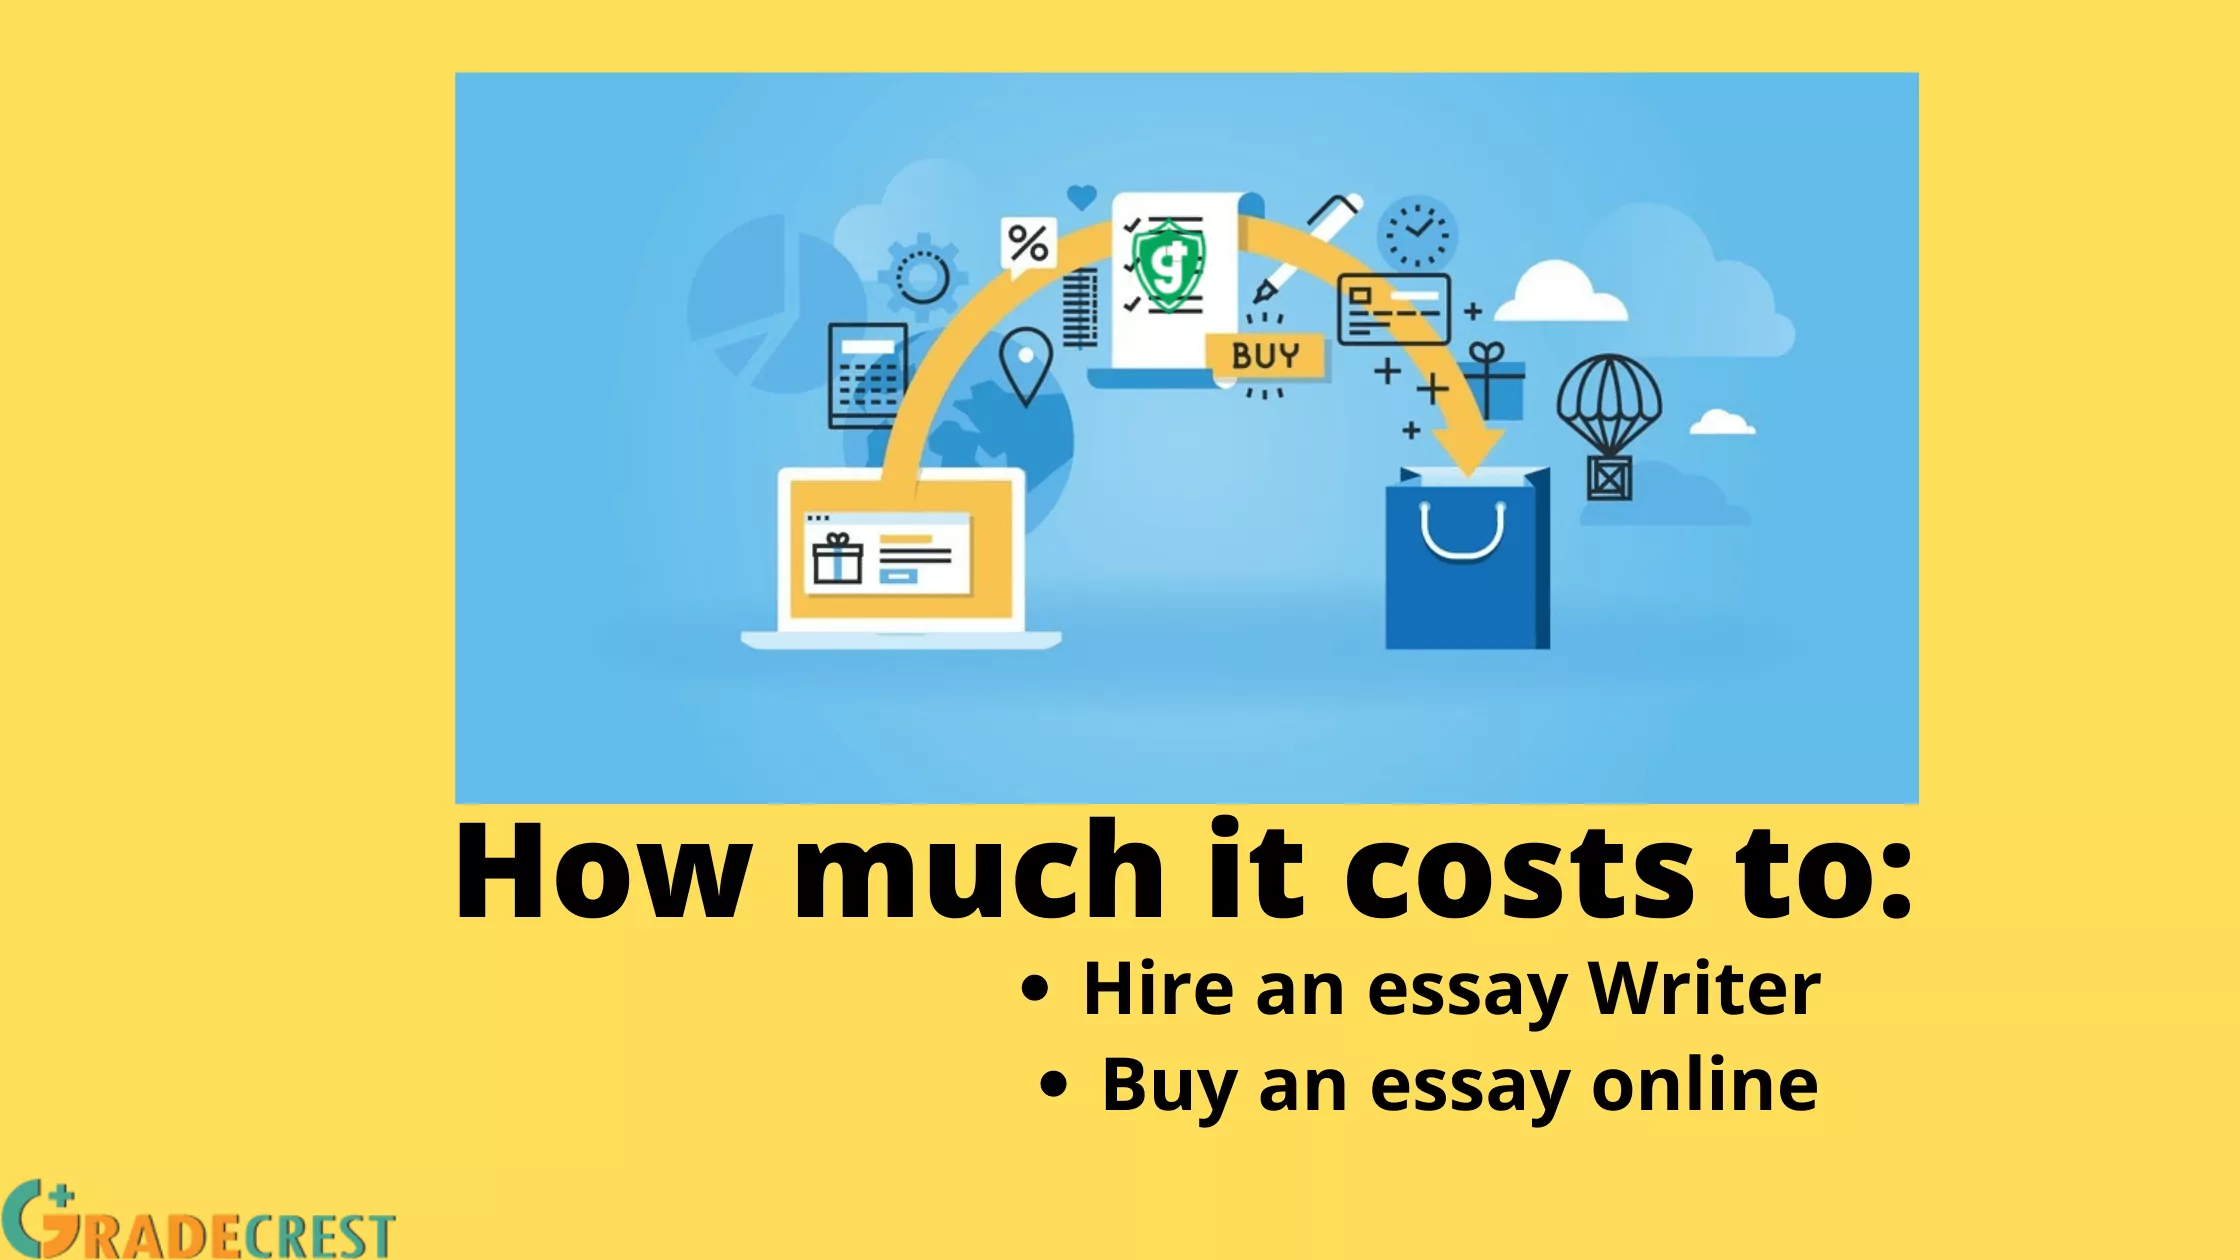 how much does it cost to hire an essay writer or buy essay